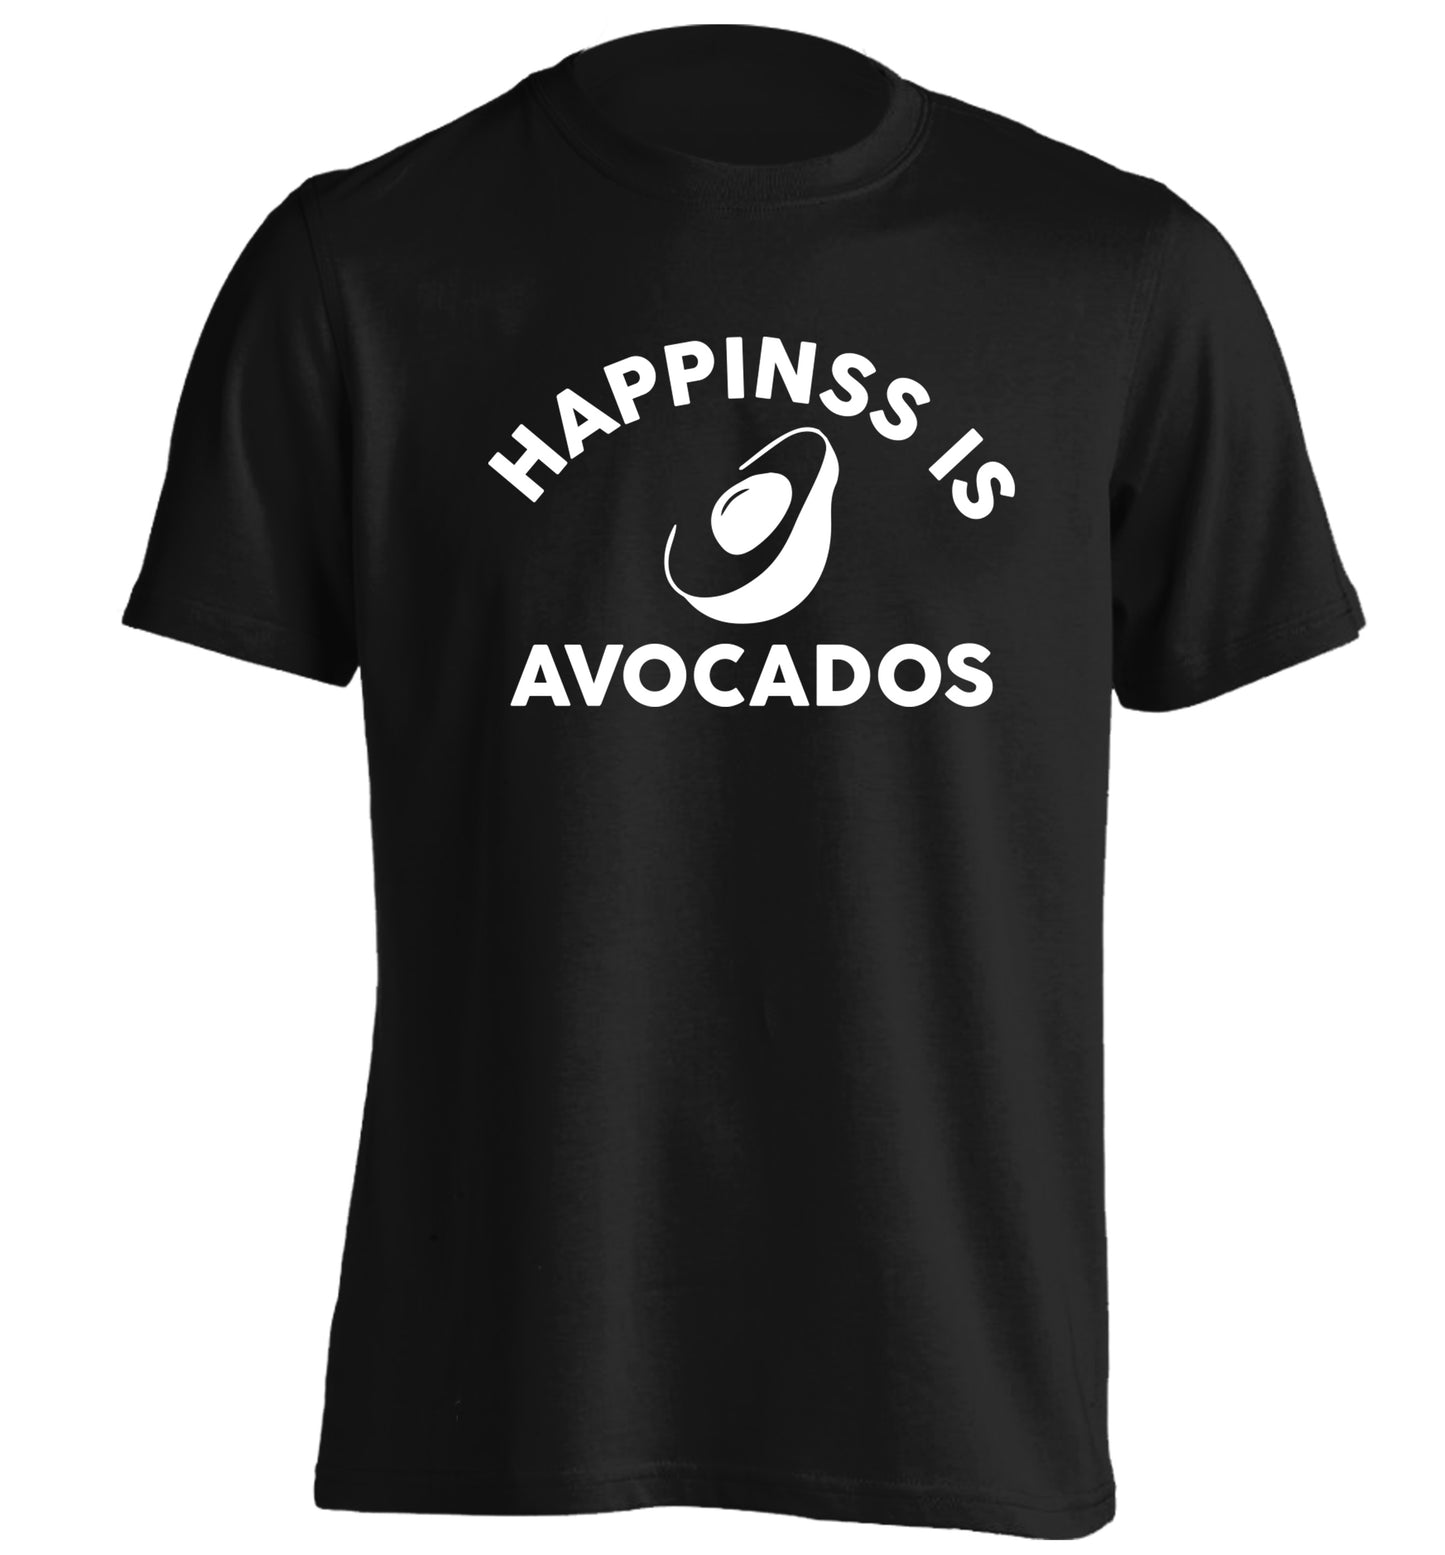 Happiness is avocados adults unisex black Tshirt 2XL